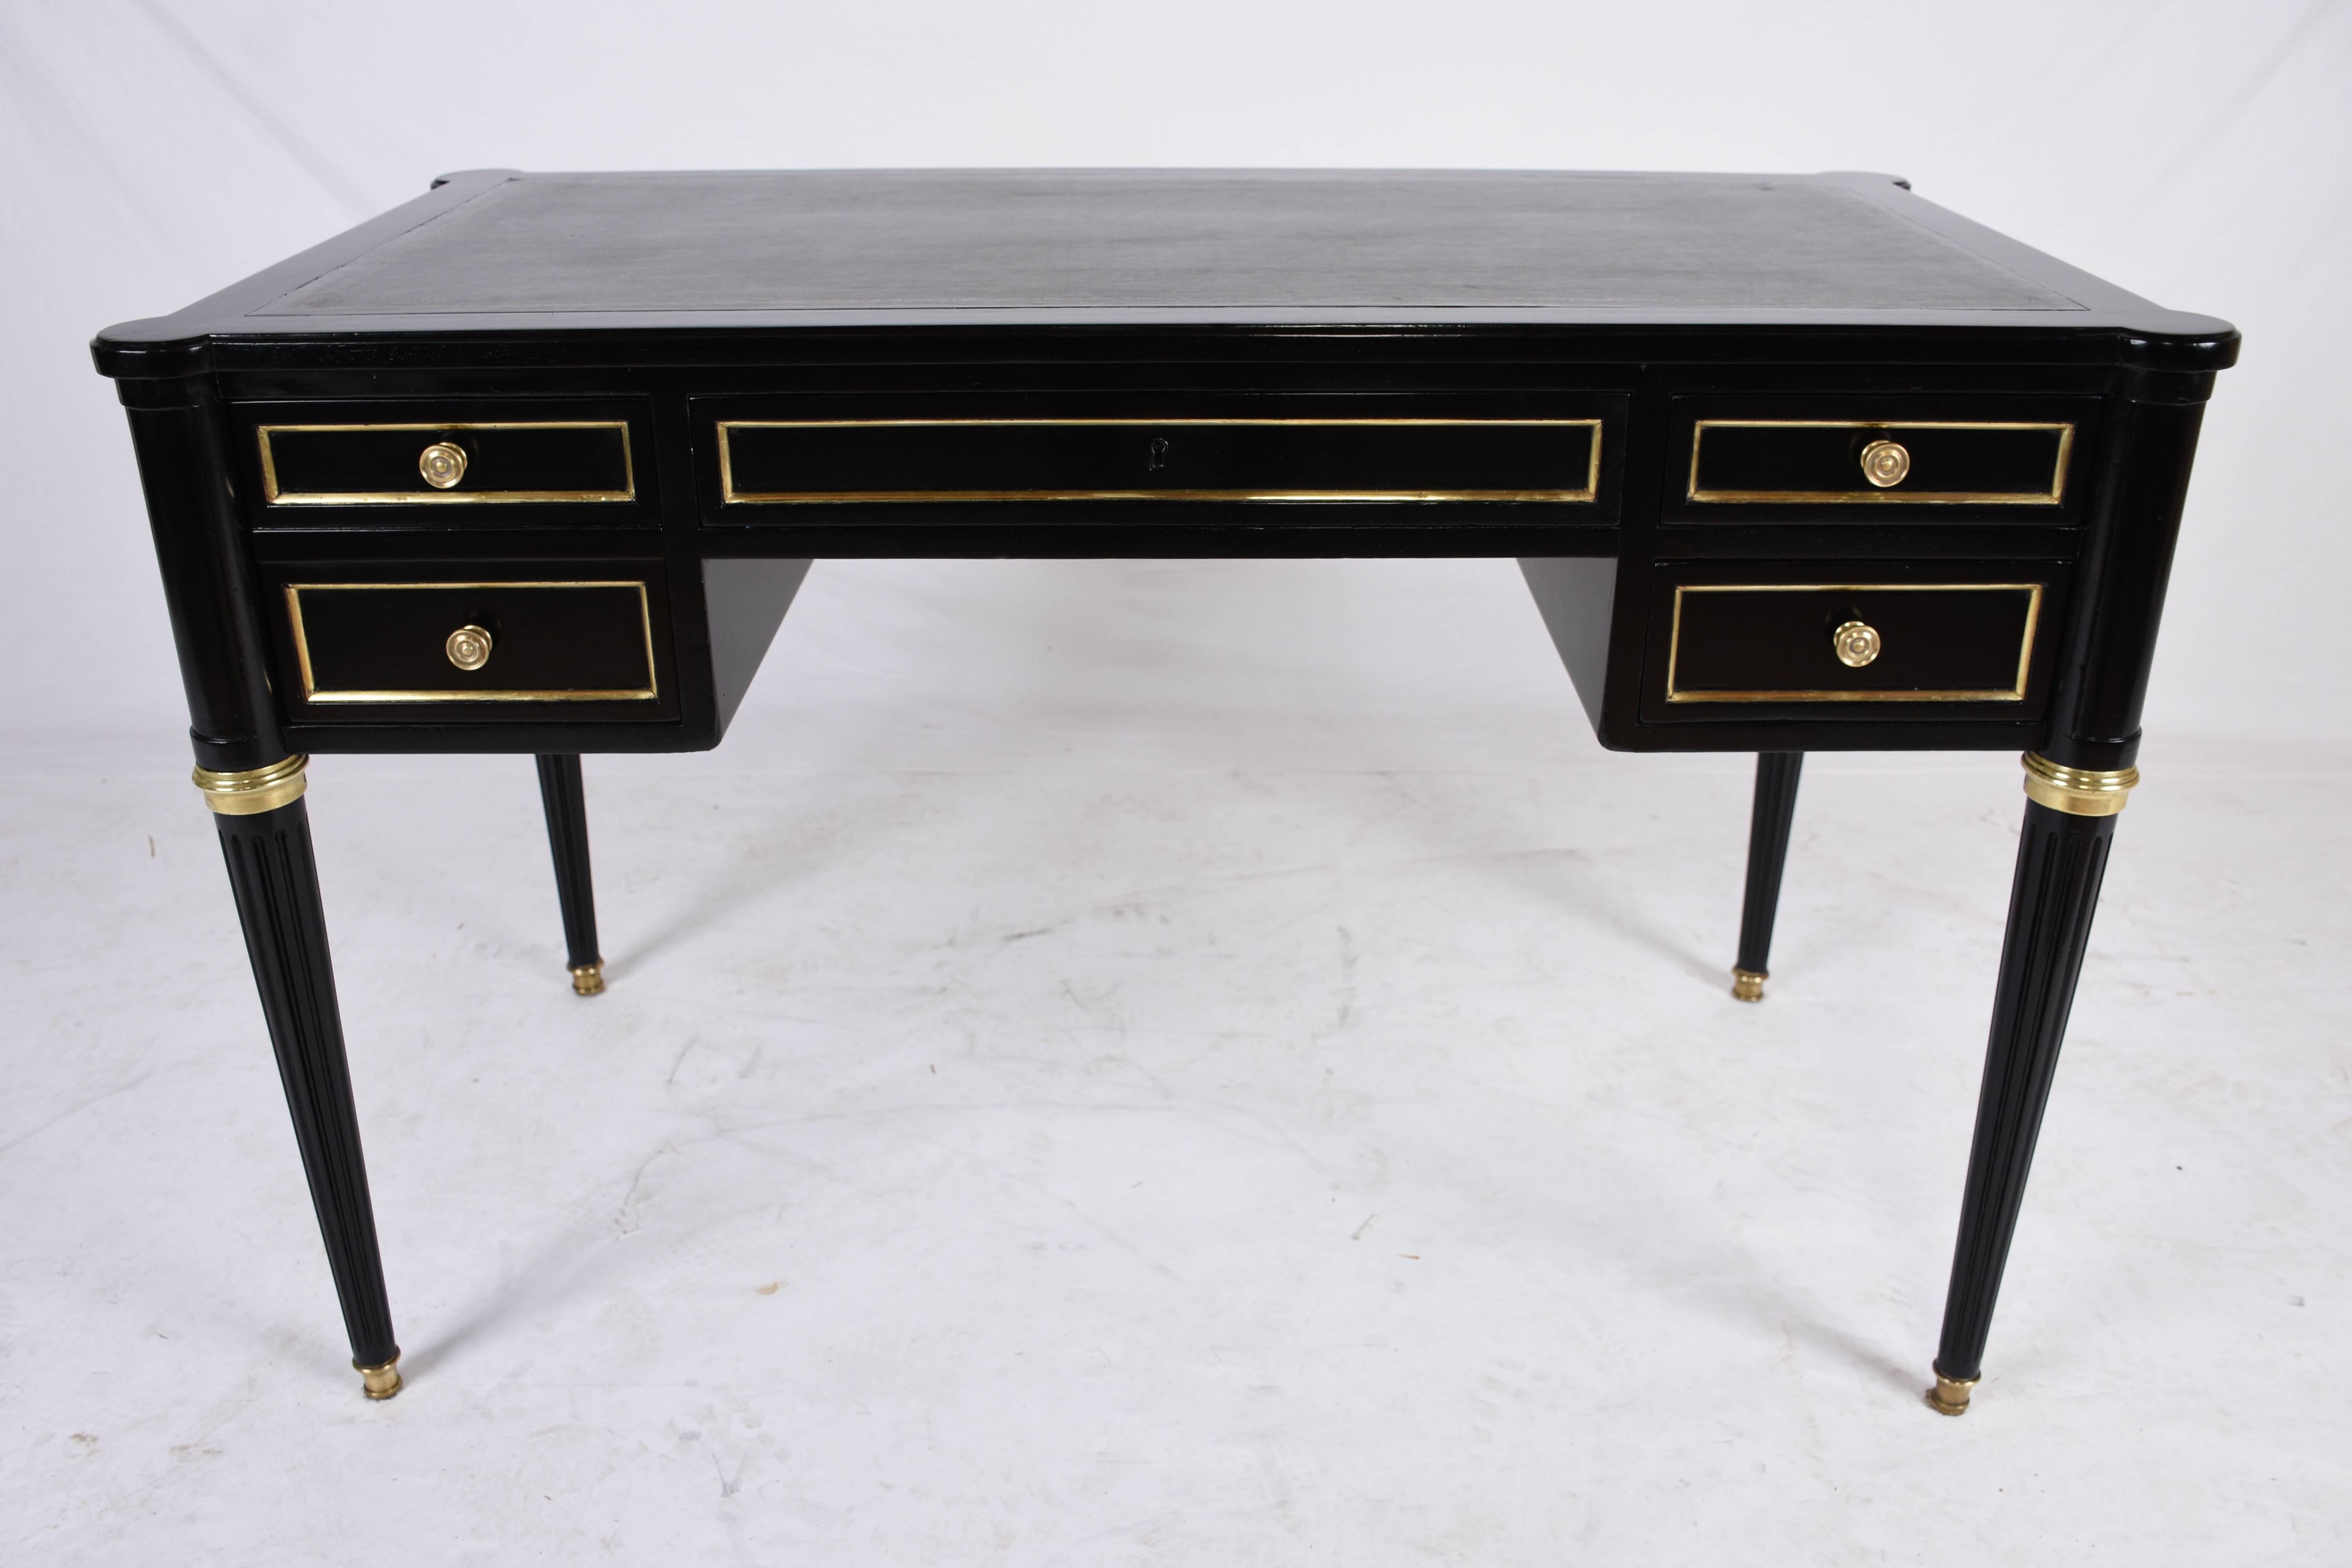 This 1910's Antique French Louis XVI-style desk is made of mahogany wood that has been stained in a rich black color with a lacquered finish. The desk has its original embossed leather working space in a beautiful green color. The facade of five